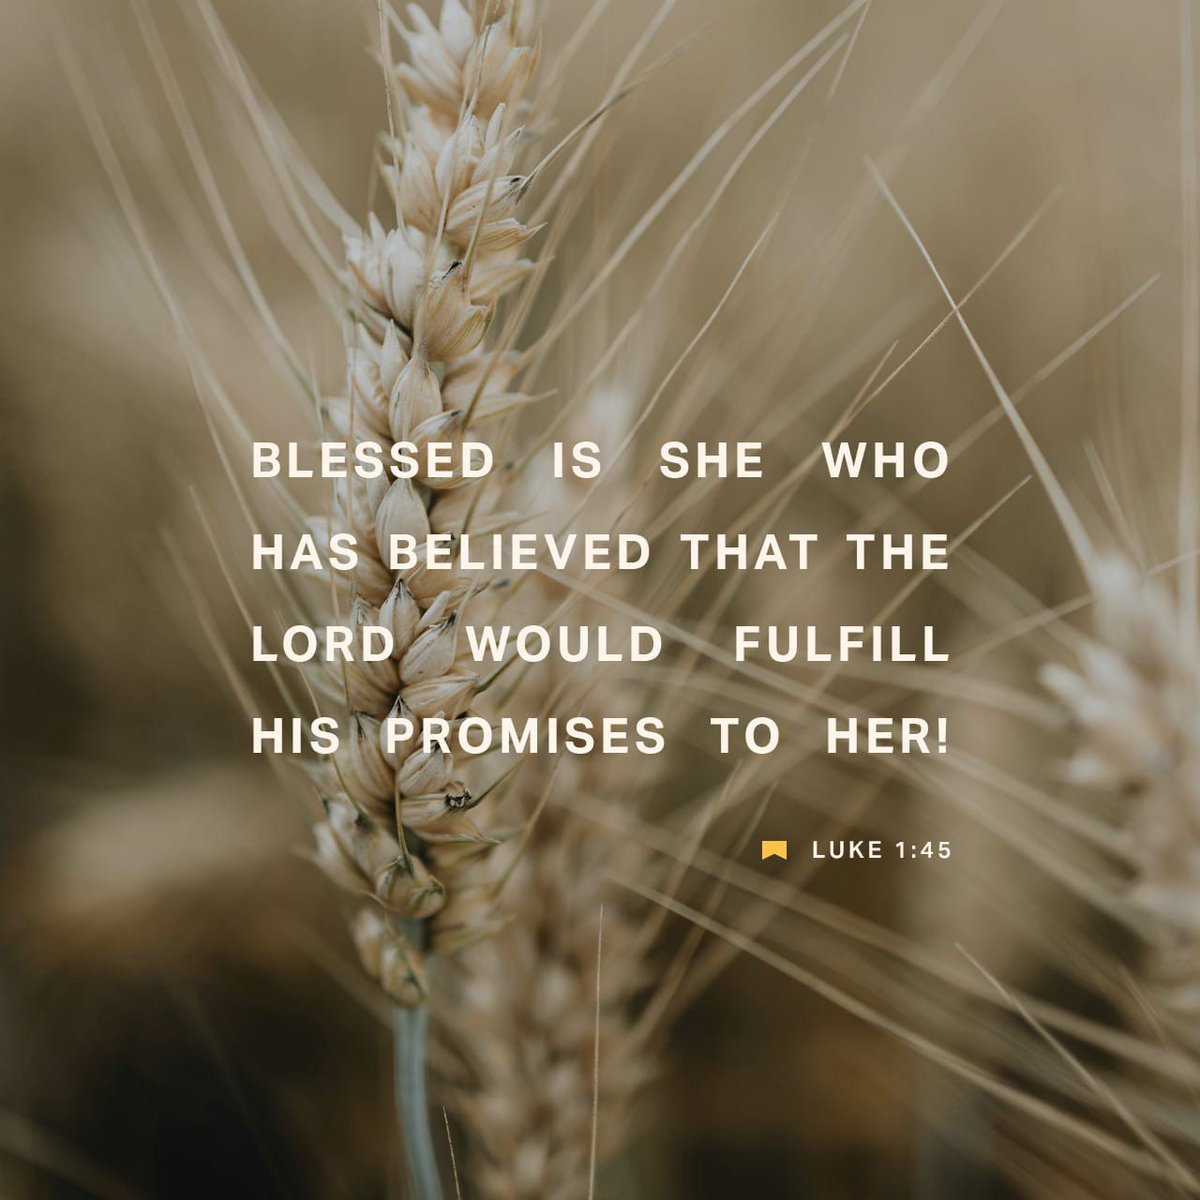 Luke 1:45 KJV [45] And blessed is she that believed: for there shall be a performance of those things which were told her from the Lord.